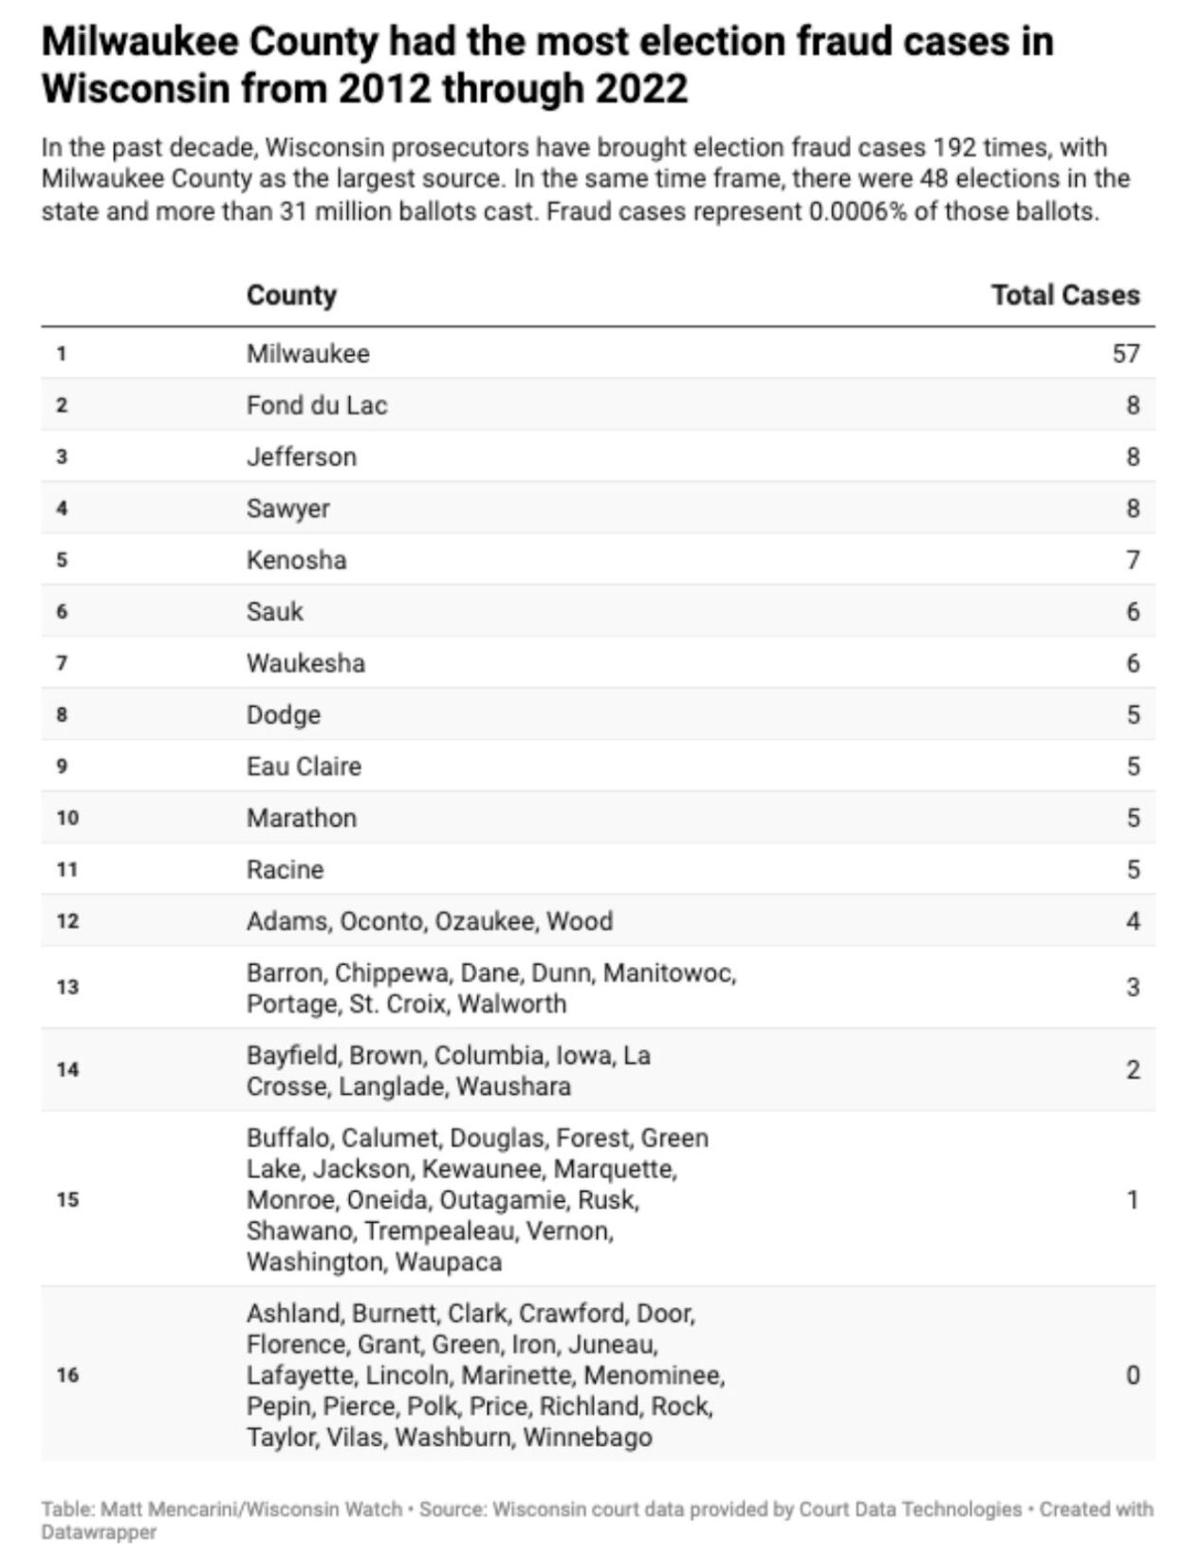 Table-Cases-by-county-version-2.pdf